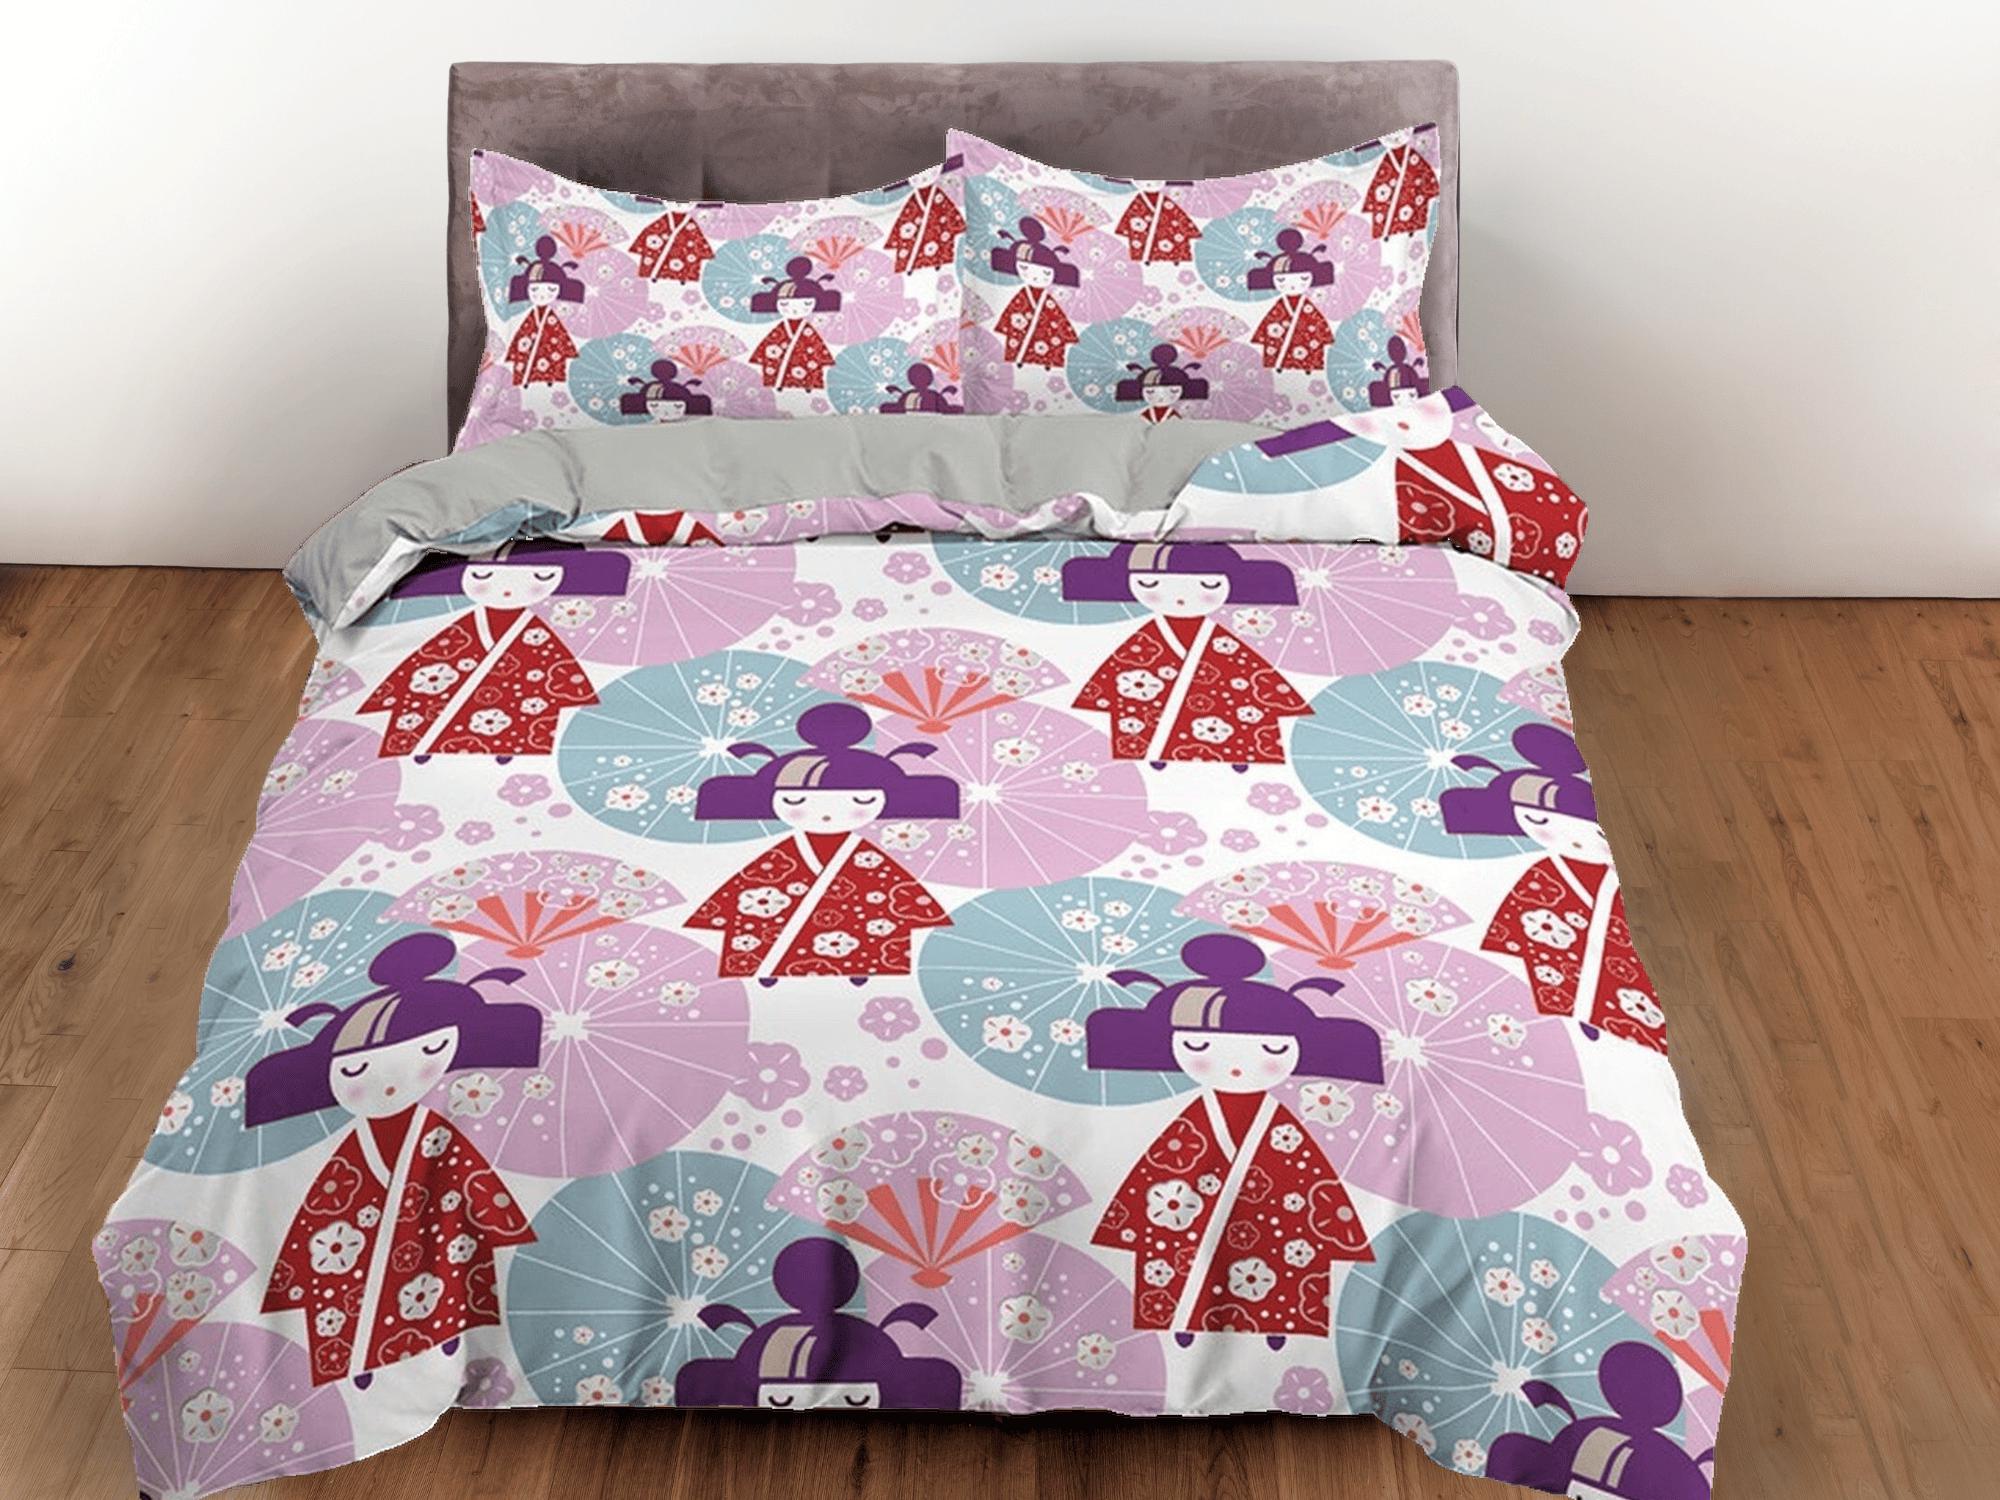 daintyduvet Cute oriental bedding for kids, kawaii geisha in kimono, colorful bedding, japanese duvet cover set for king, queen, full, twin, toddler bed